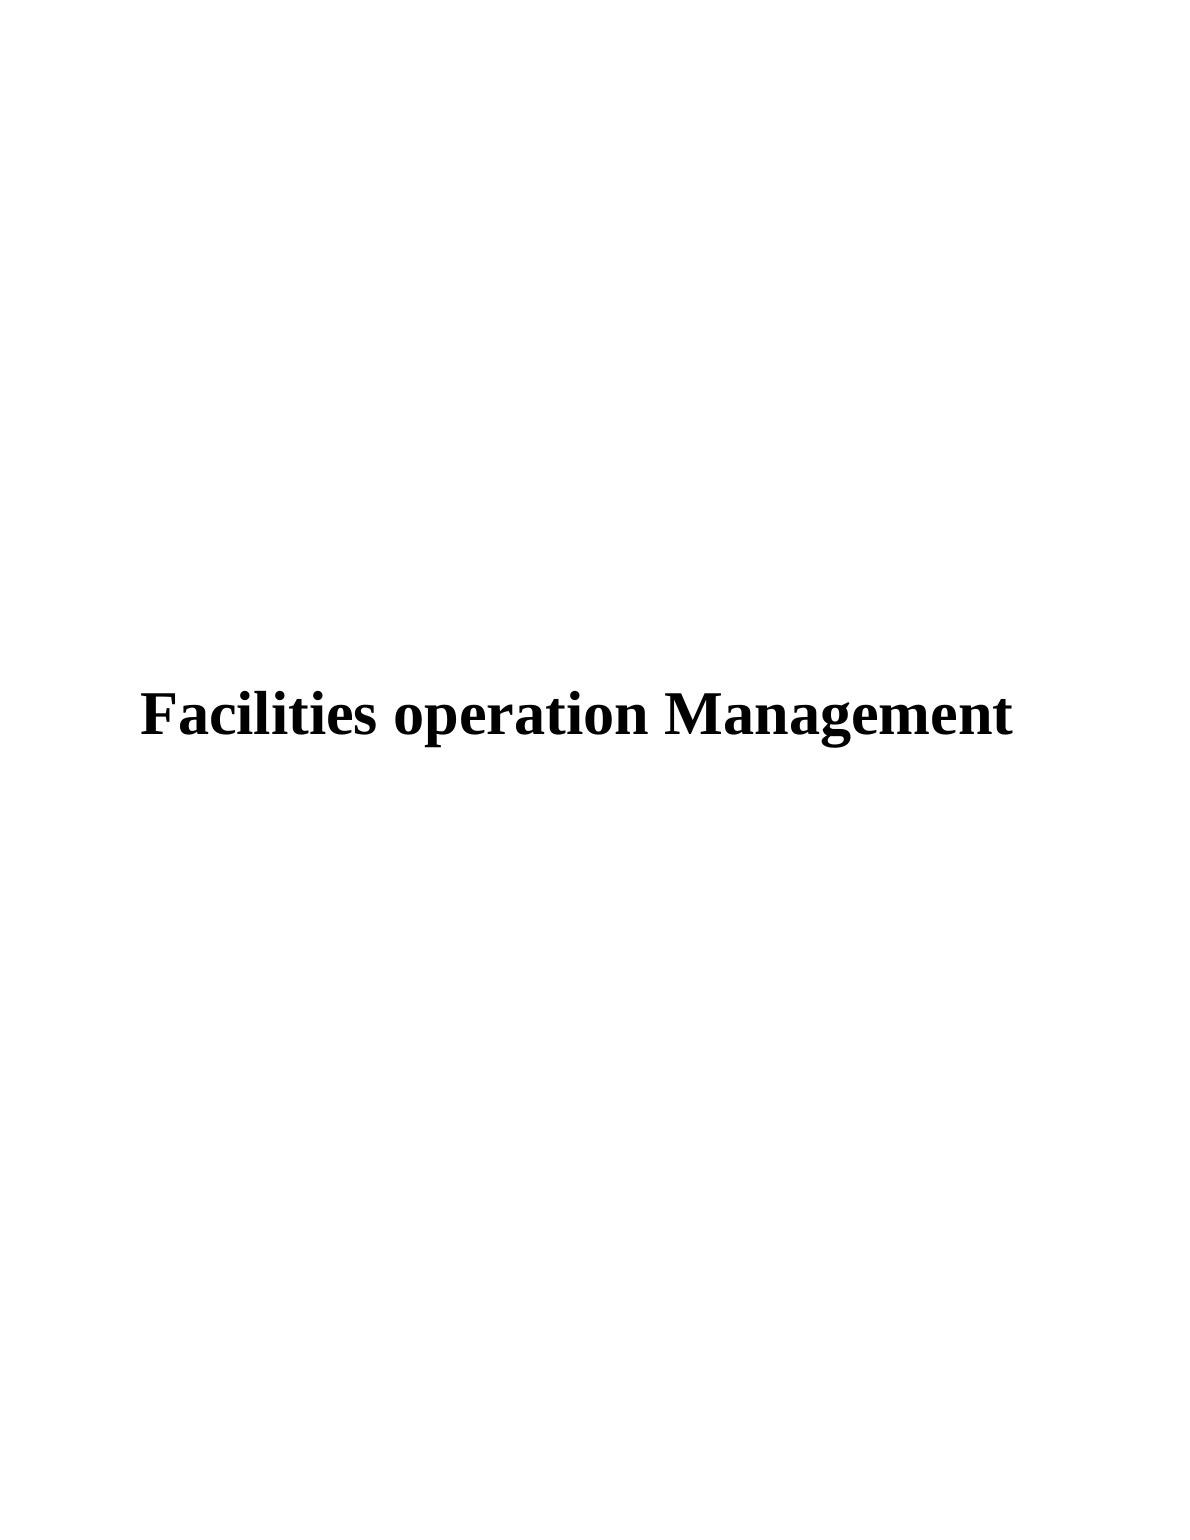 TABLE OF CONTENTS INTRODUCTION 1 TASK 11 A. Responsibilities as a Facilities Manager_1